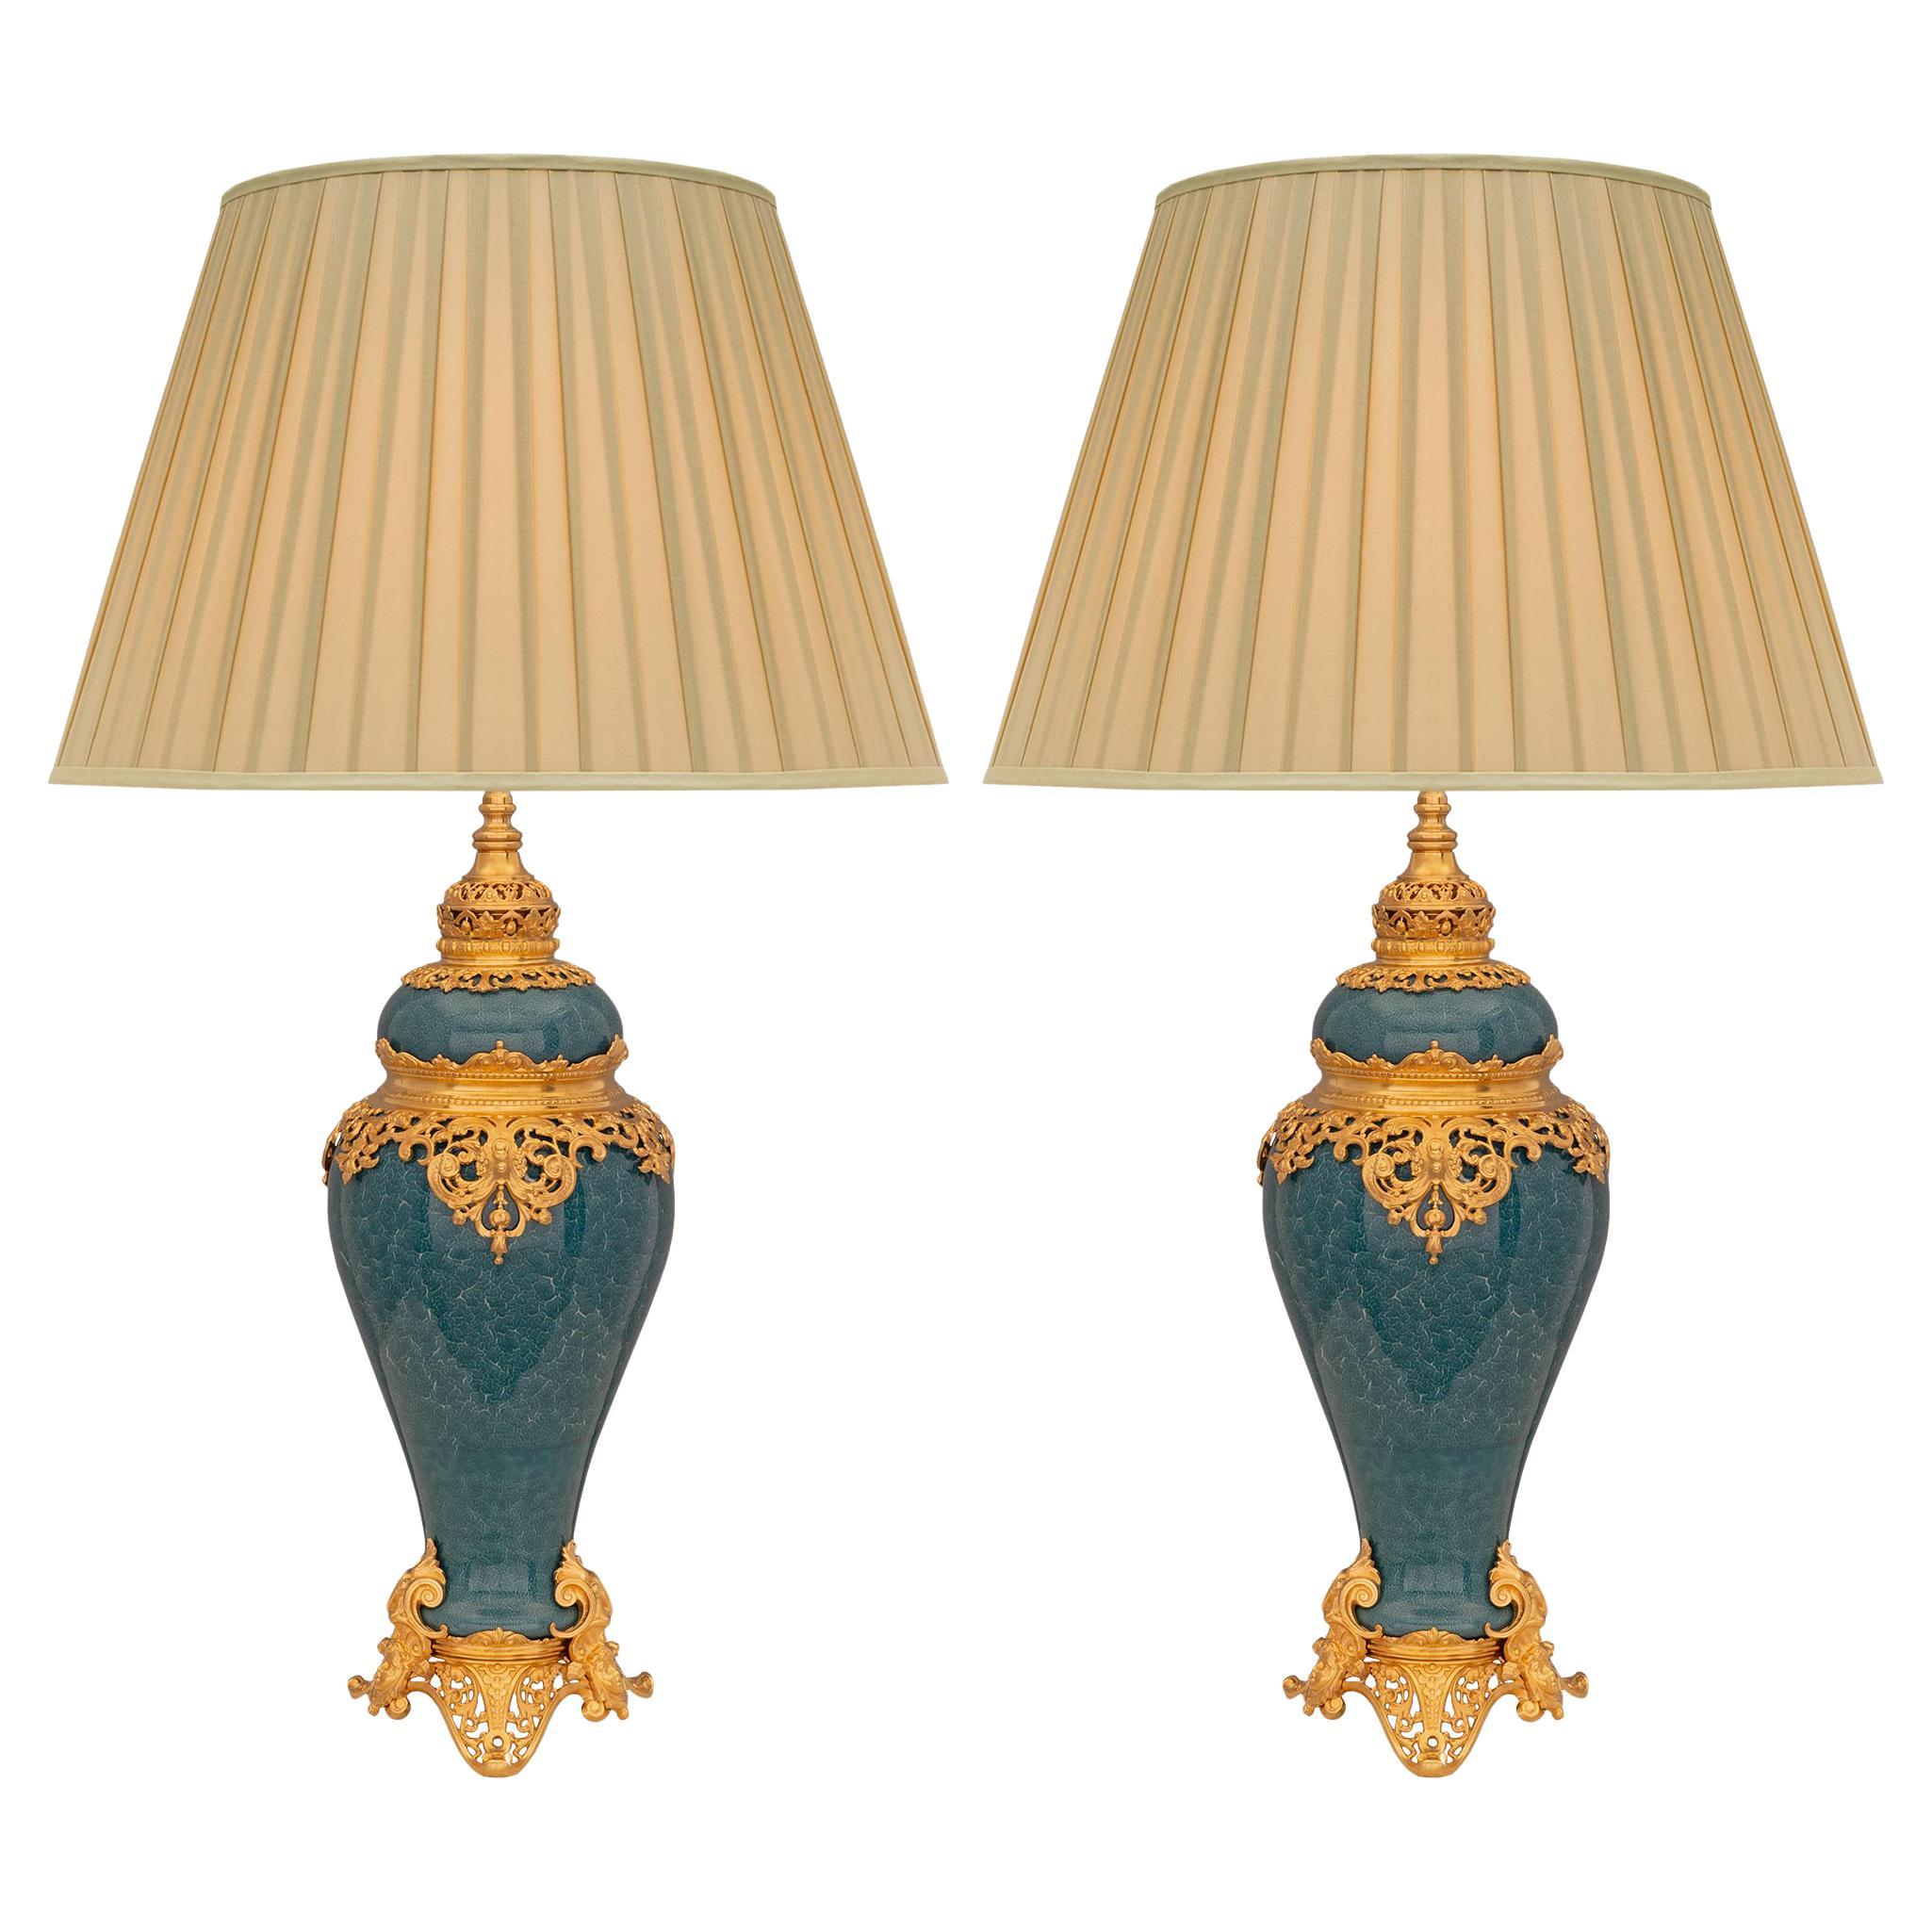 Pair of French and Asian Collaboration 19th Century Régence Style Lamps For Sale